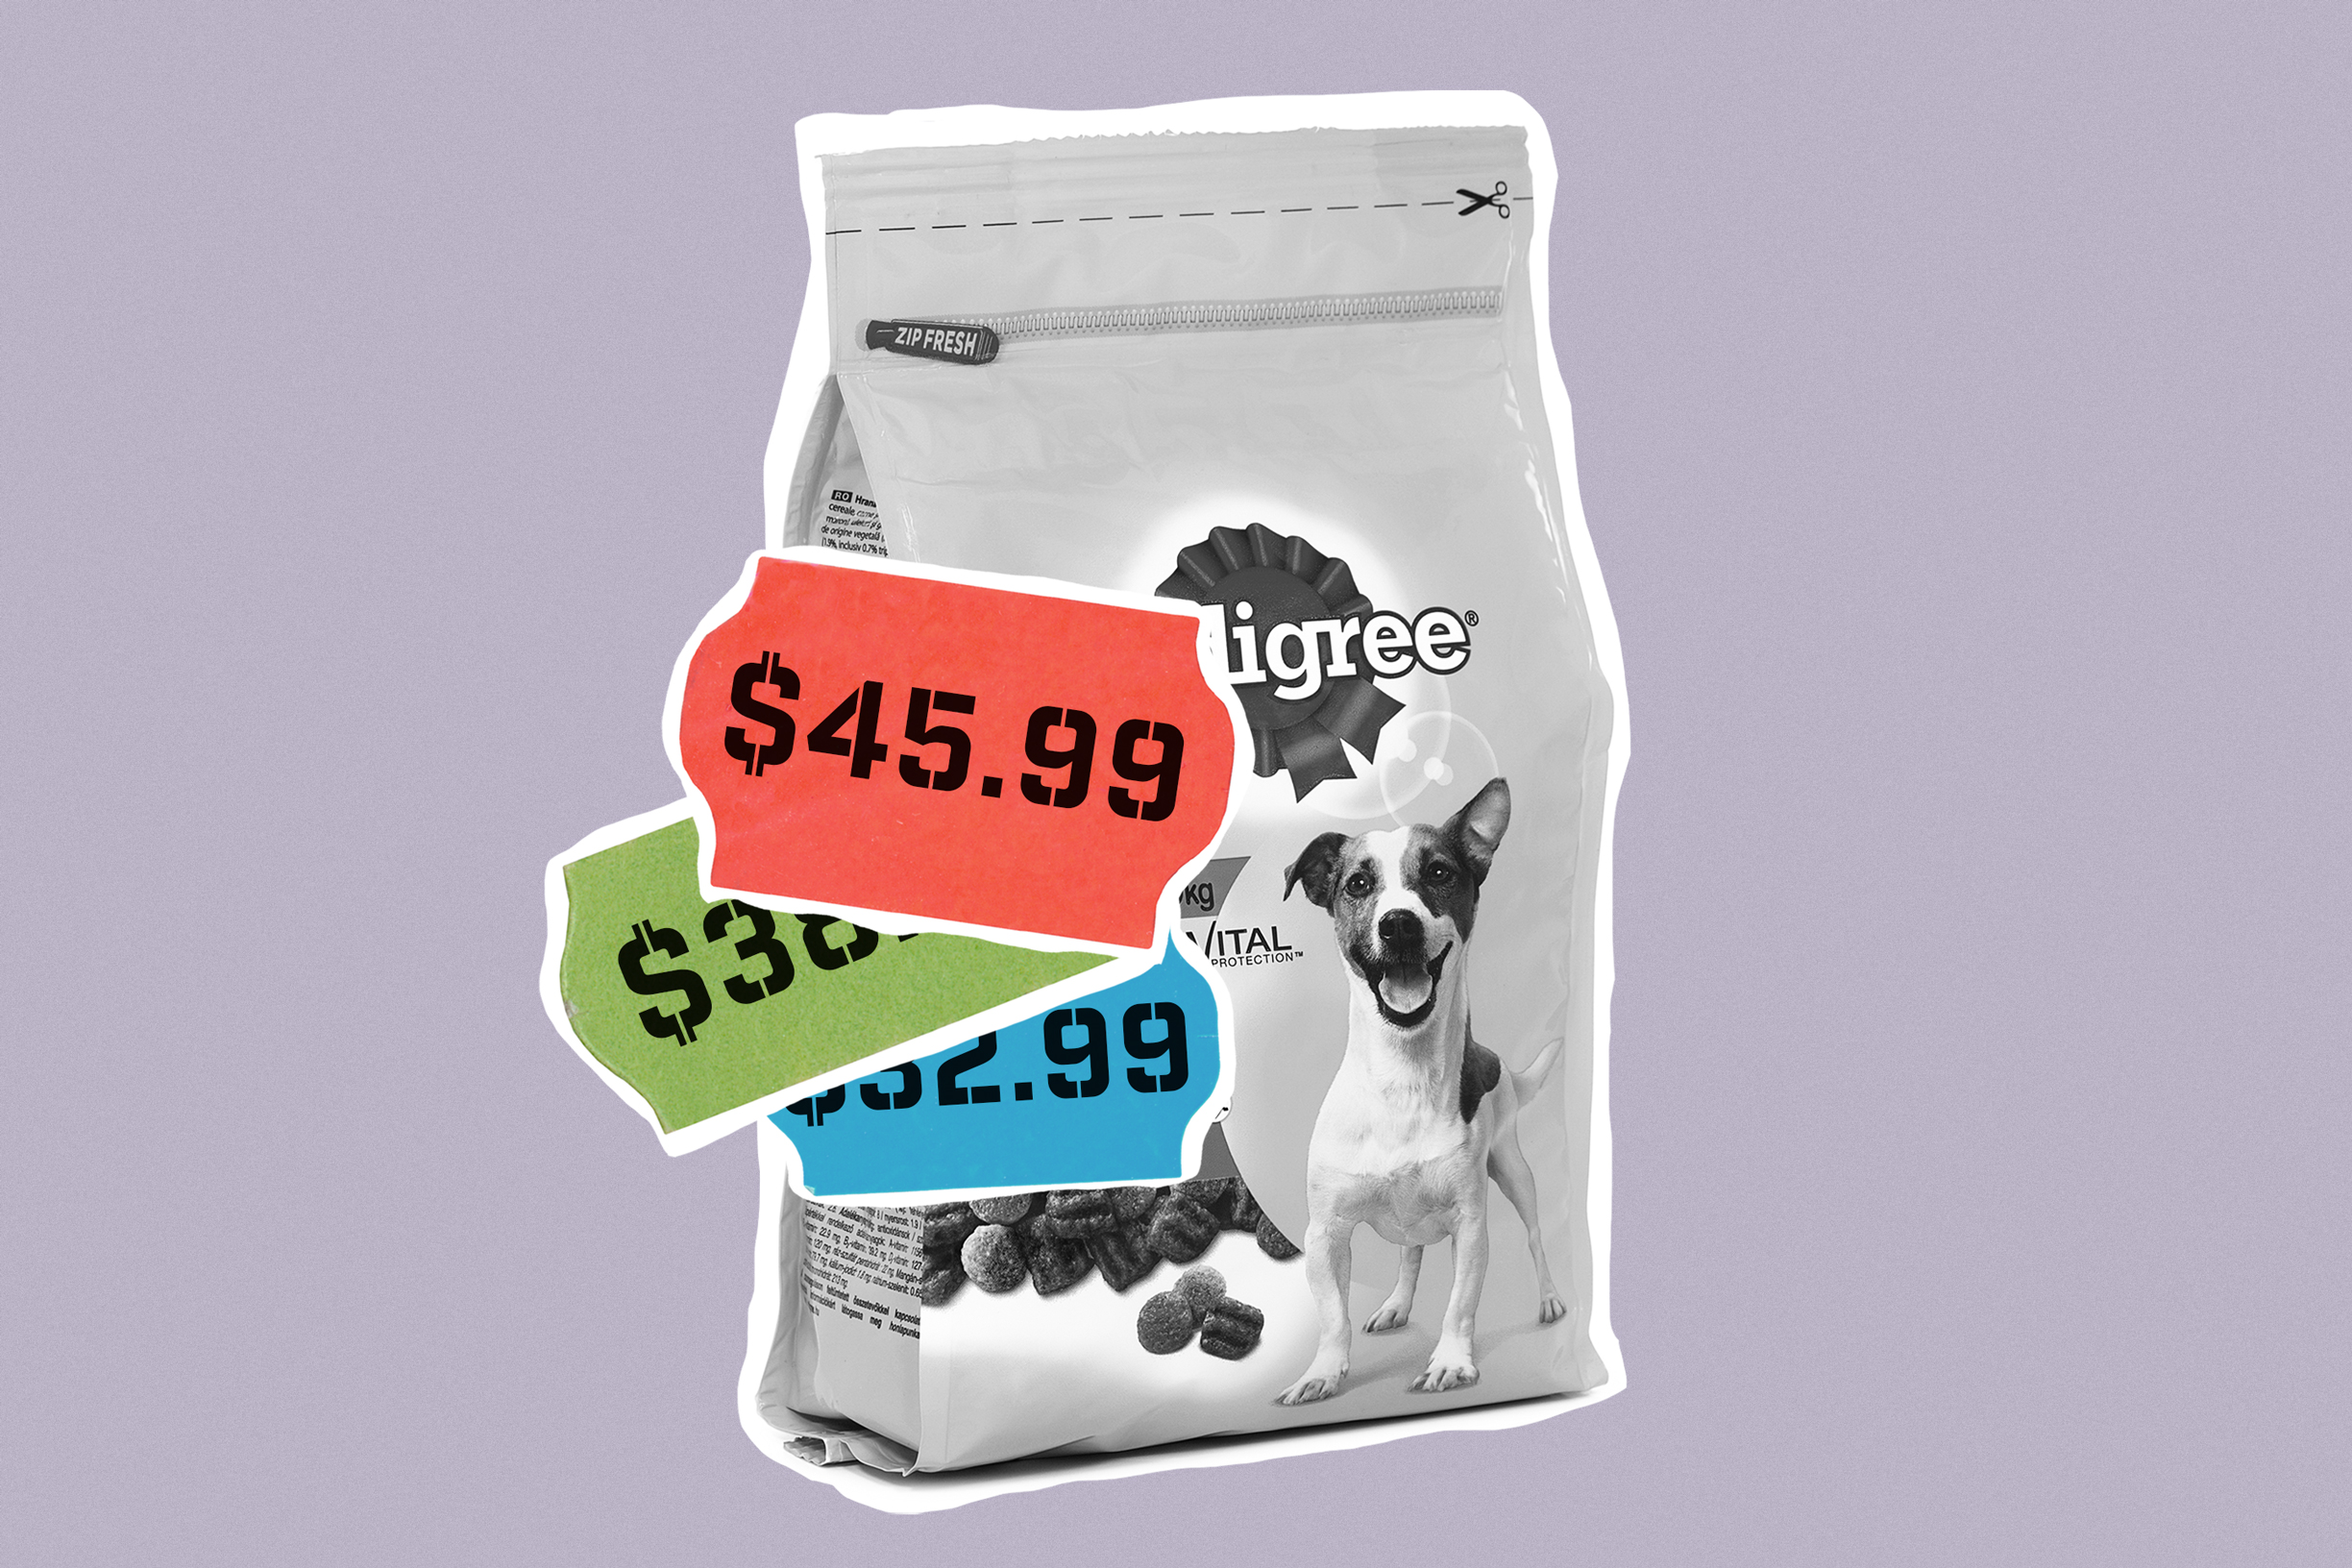 From Dresses to Dog Food, Here Are 8 Essentials Inflation Is Making More Expensive